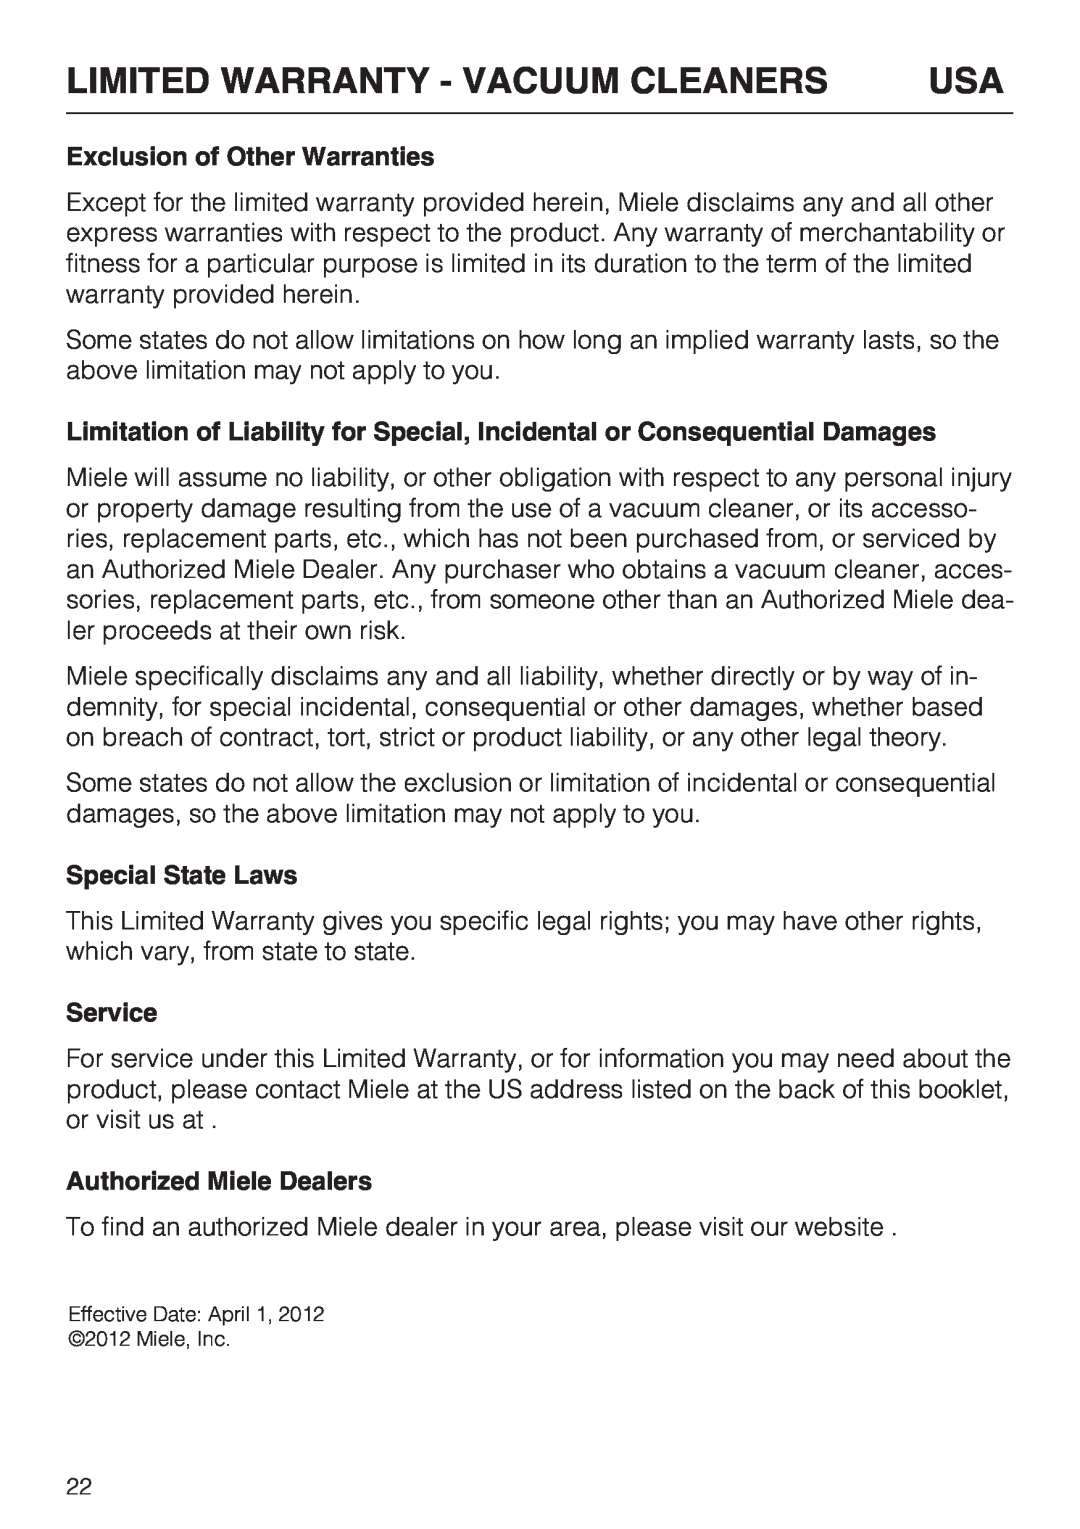 Miele S 8900 manual Exclusion of Other Warranties, Special State Laws, Service, Authorized Miele Dealers 